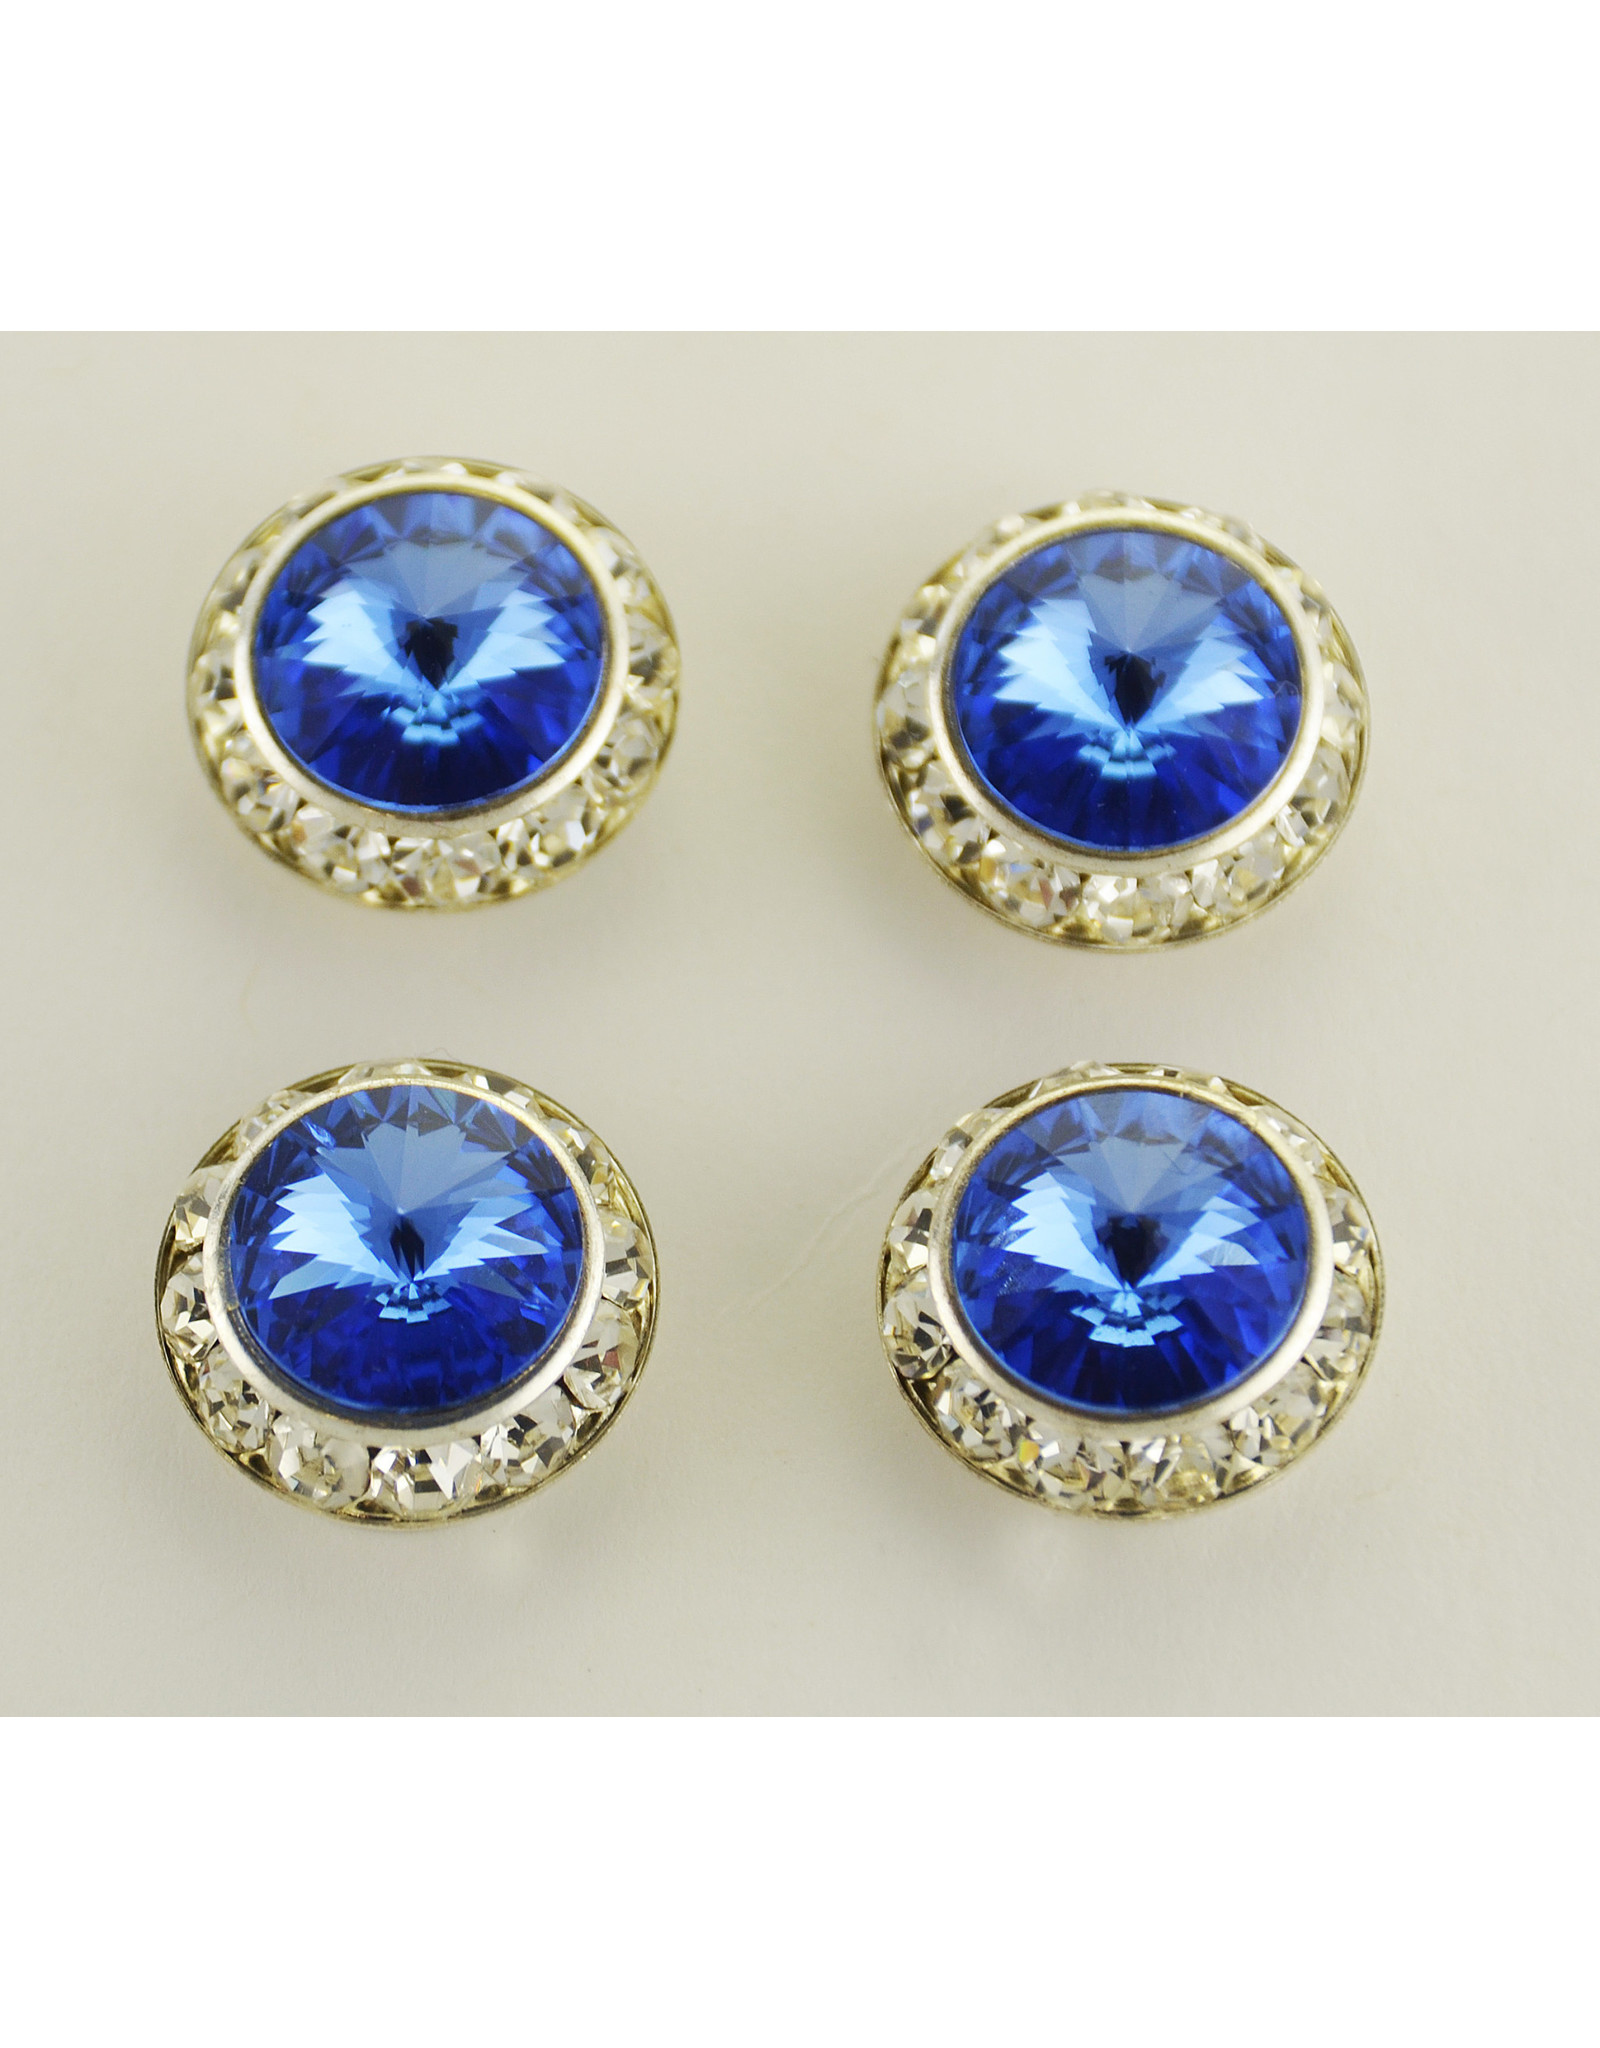 Number Magnets HTP405 with Preciosa Blue Stones